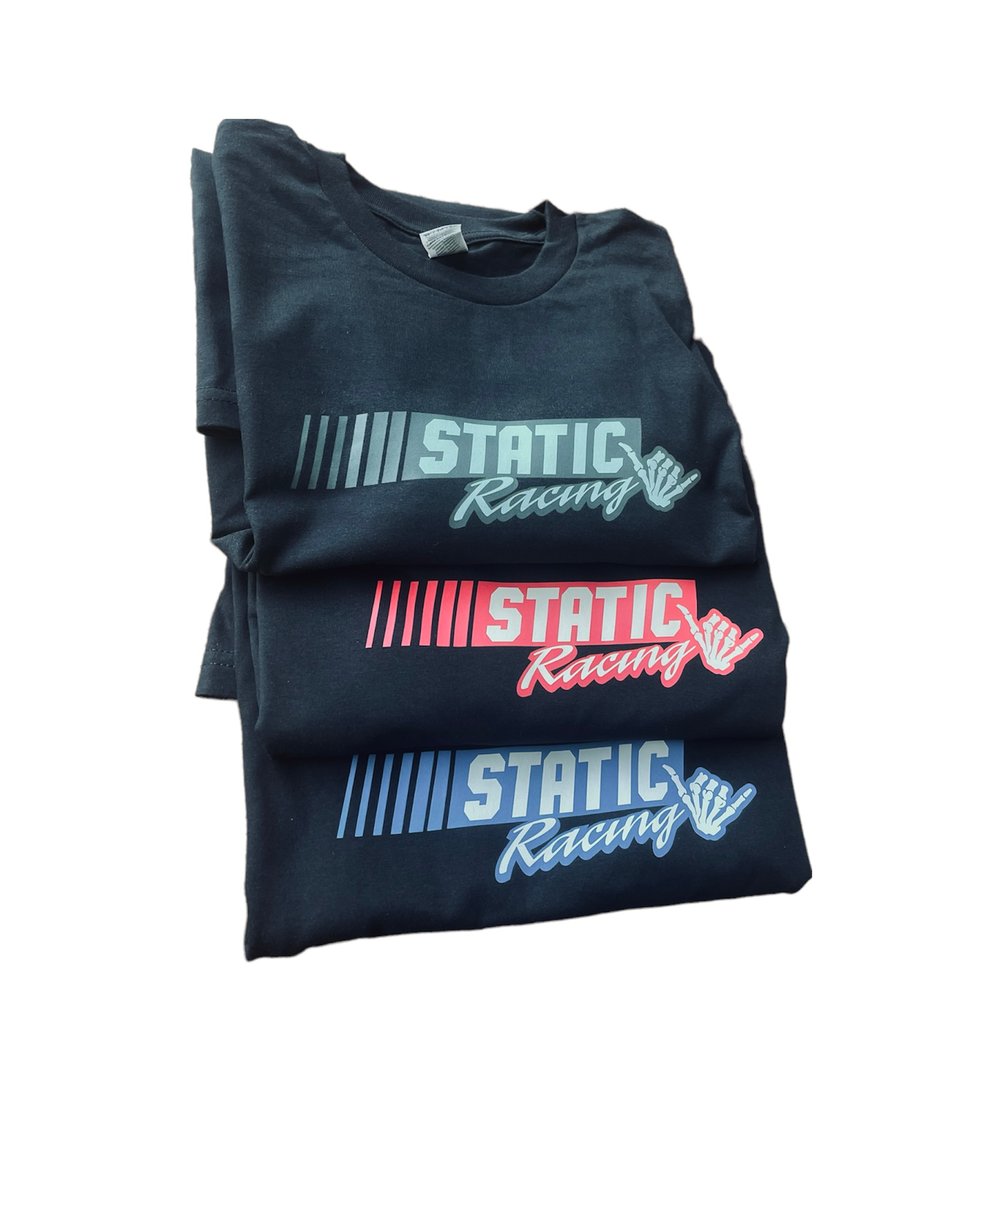 Static Racing Tee [Collectable]